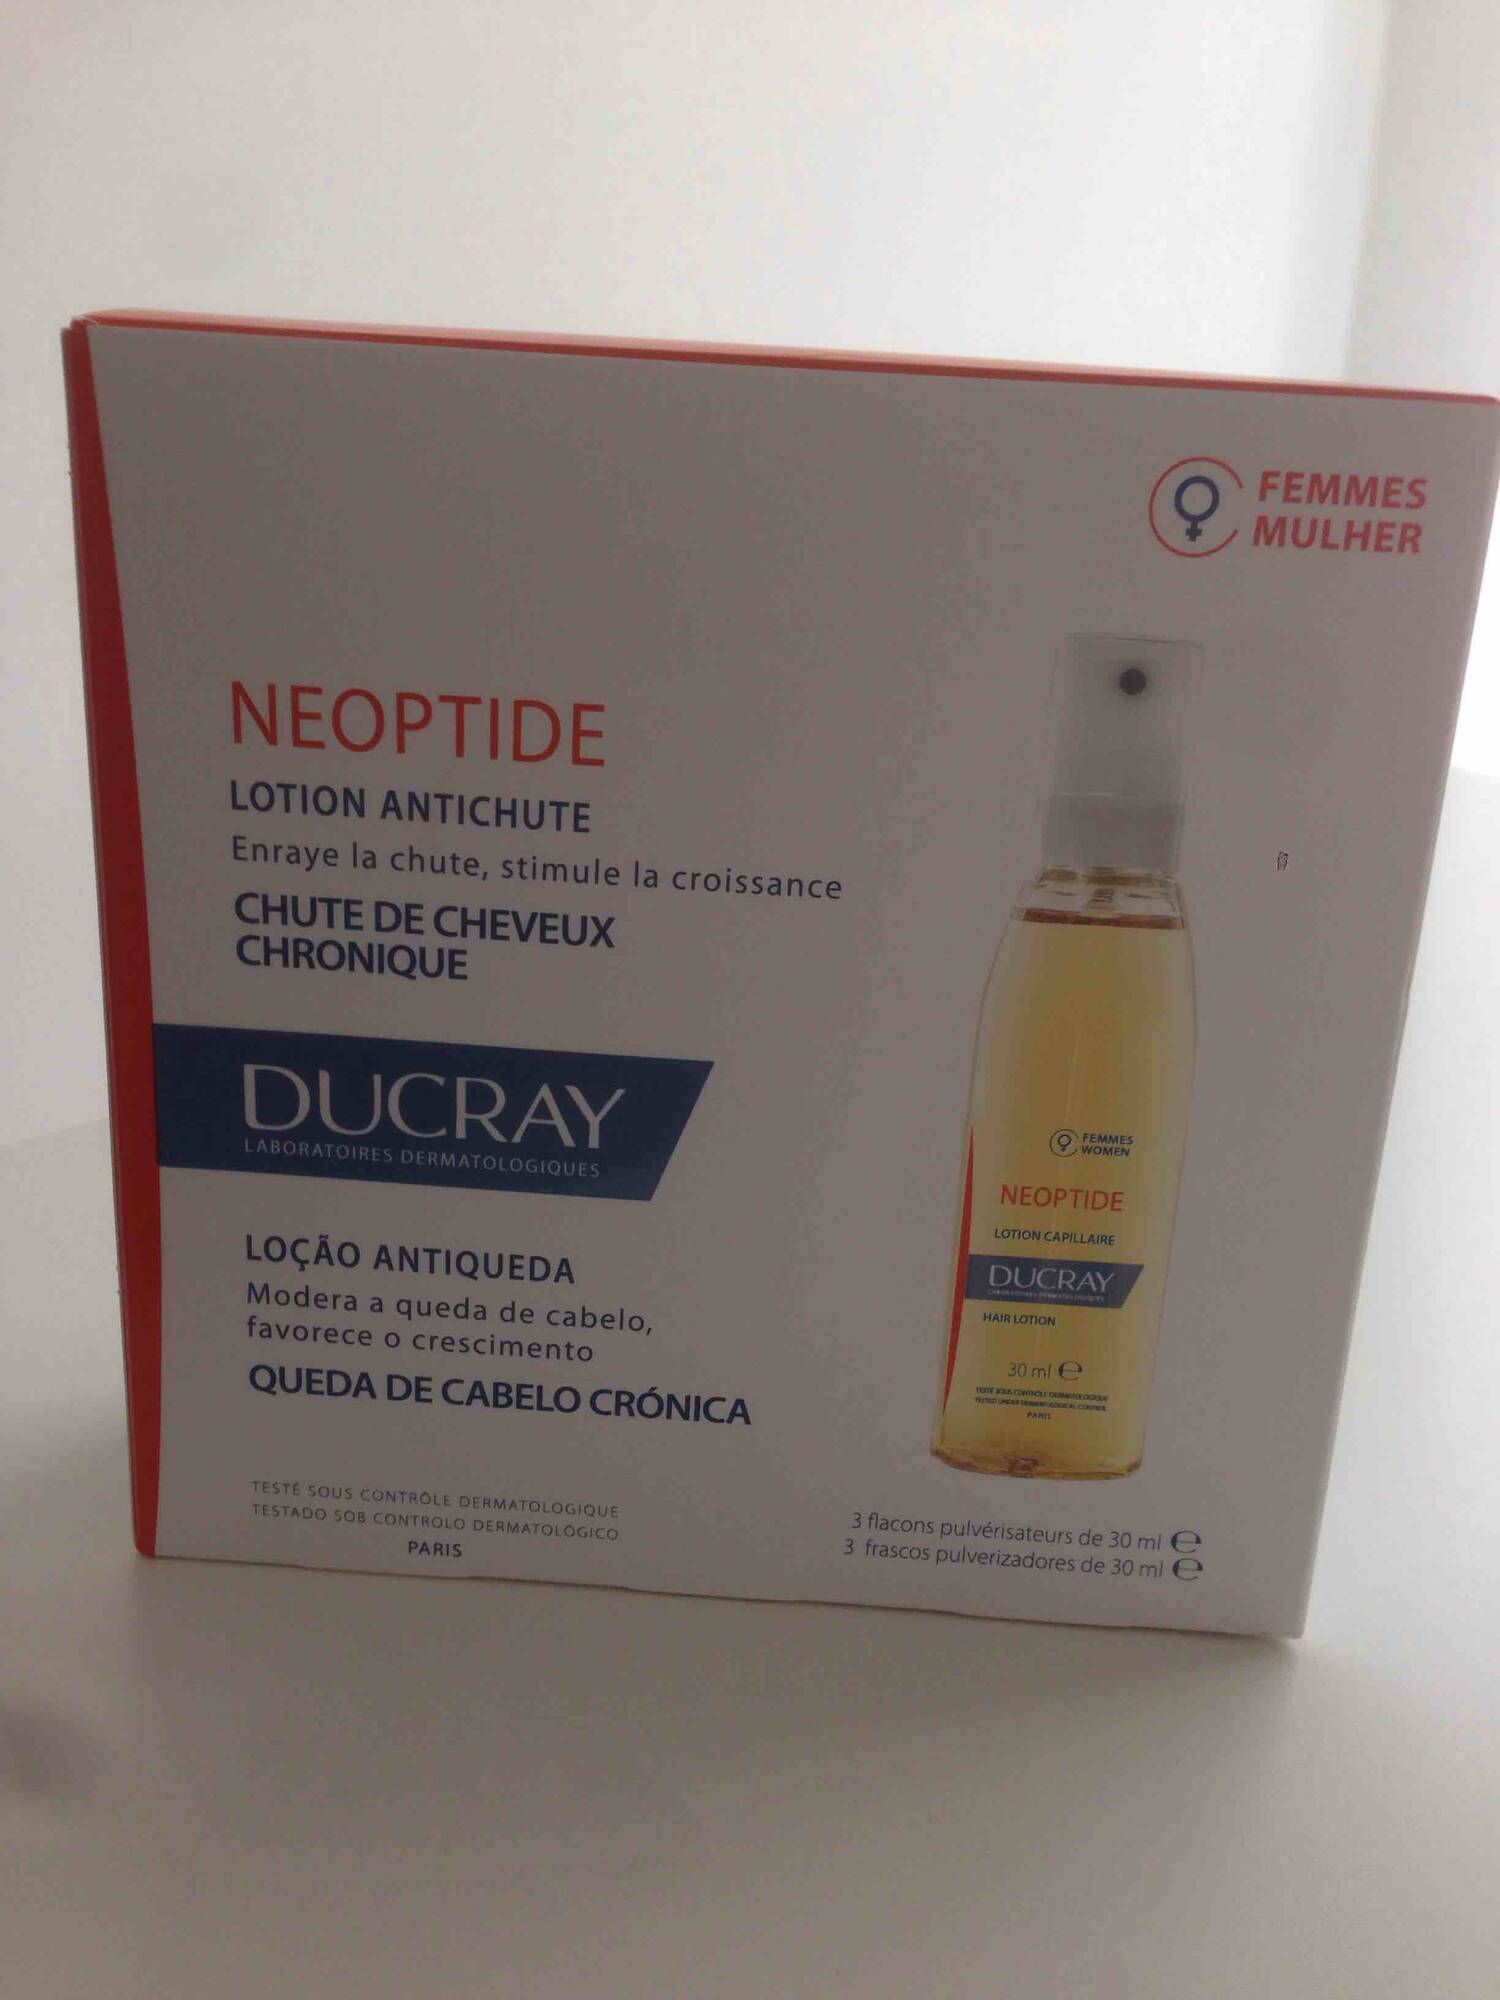 DUCRAY - Neoptide - Lotion antichute